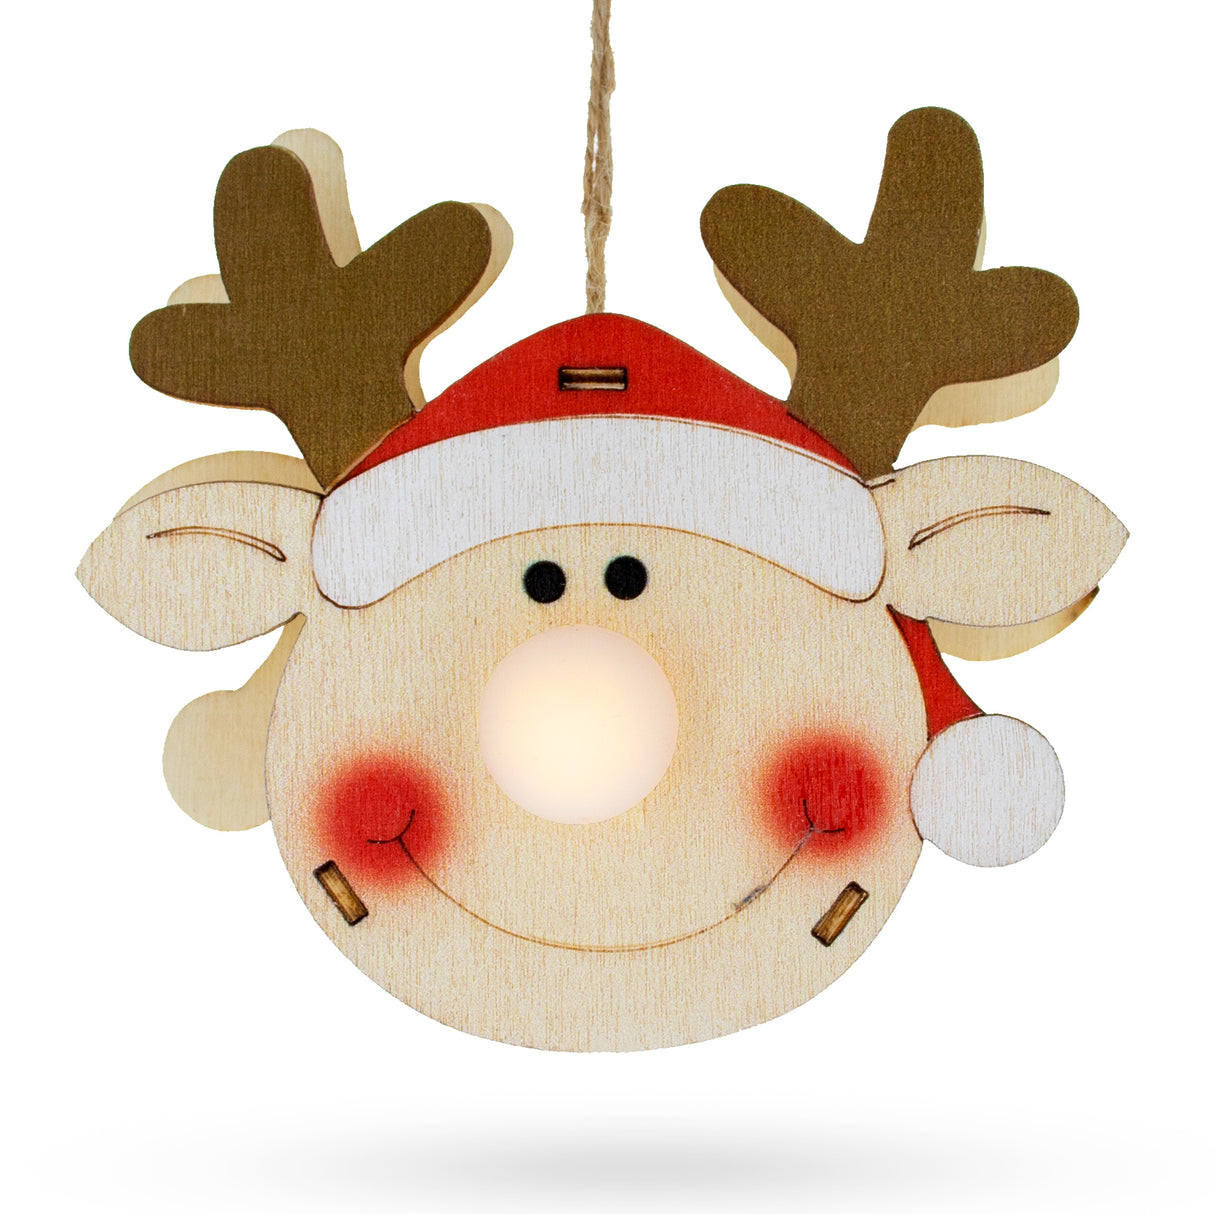 Wood Wooden Reindeer Christmas Ornament with Light Up Nose Cutout in White color